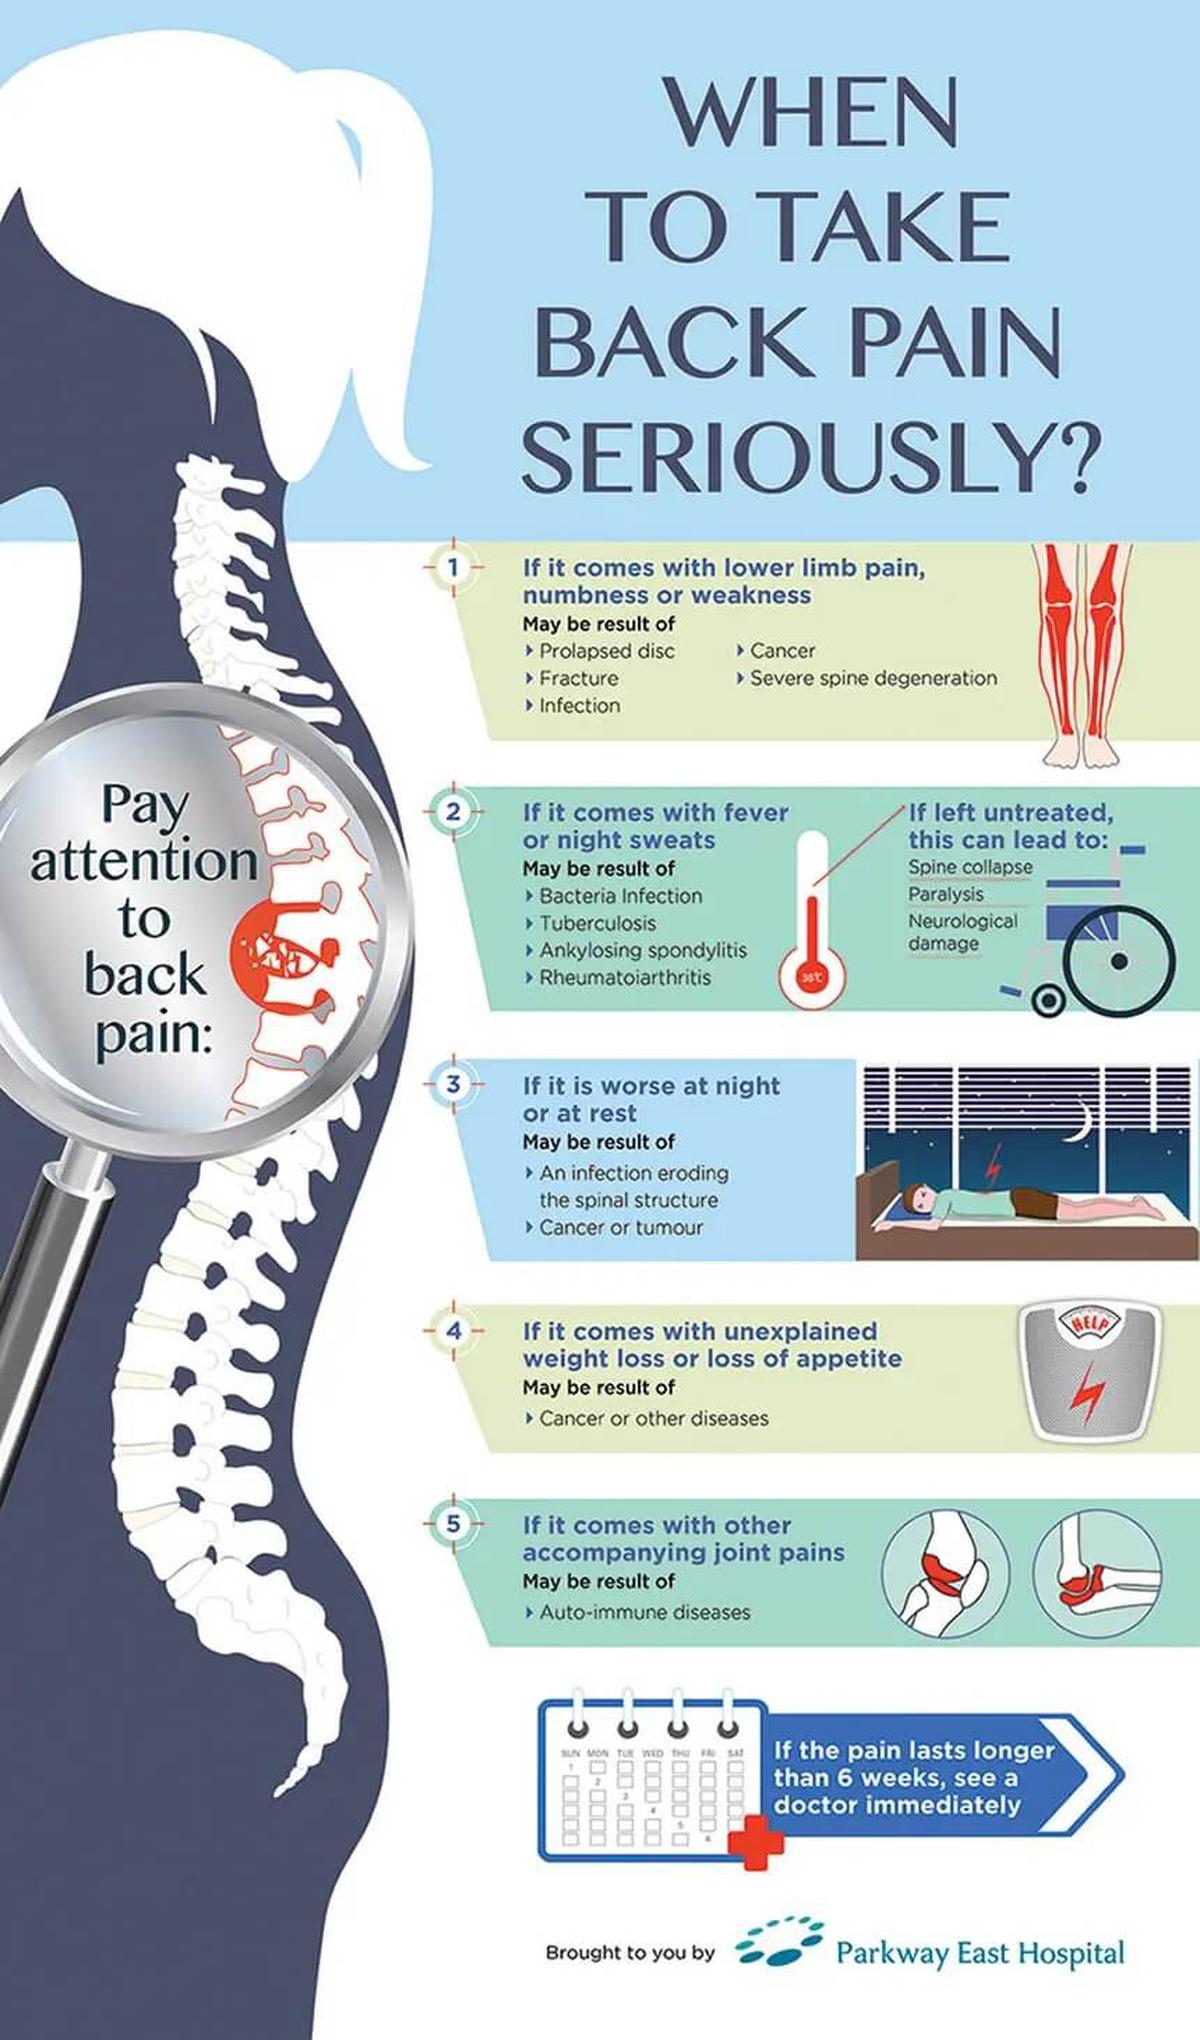 When to take back pain seriously